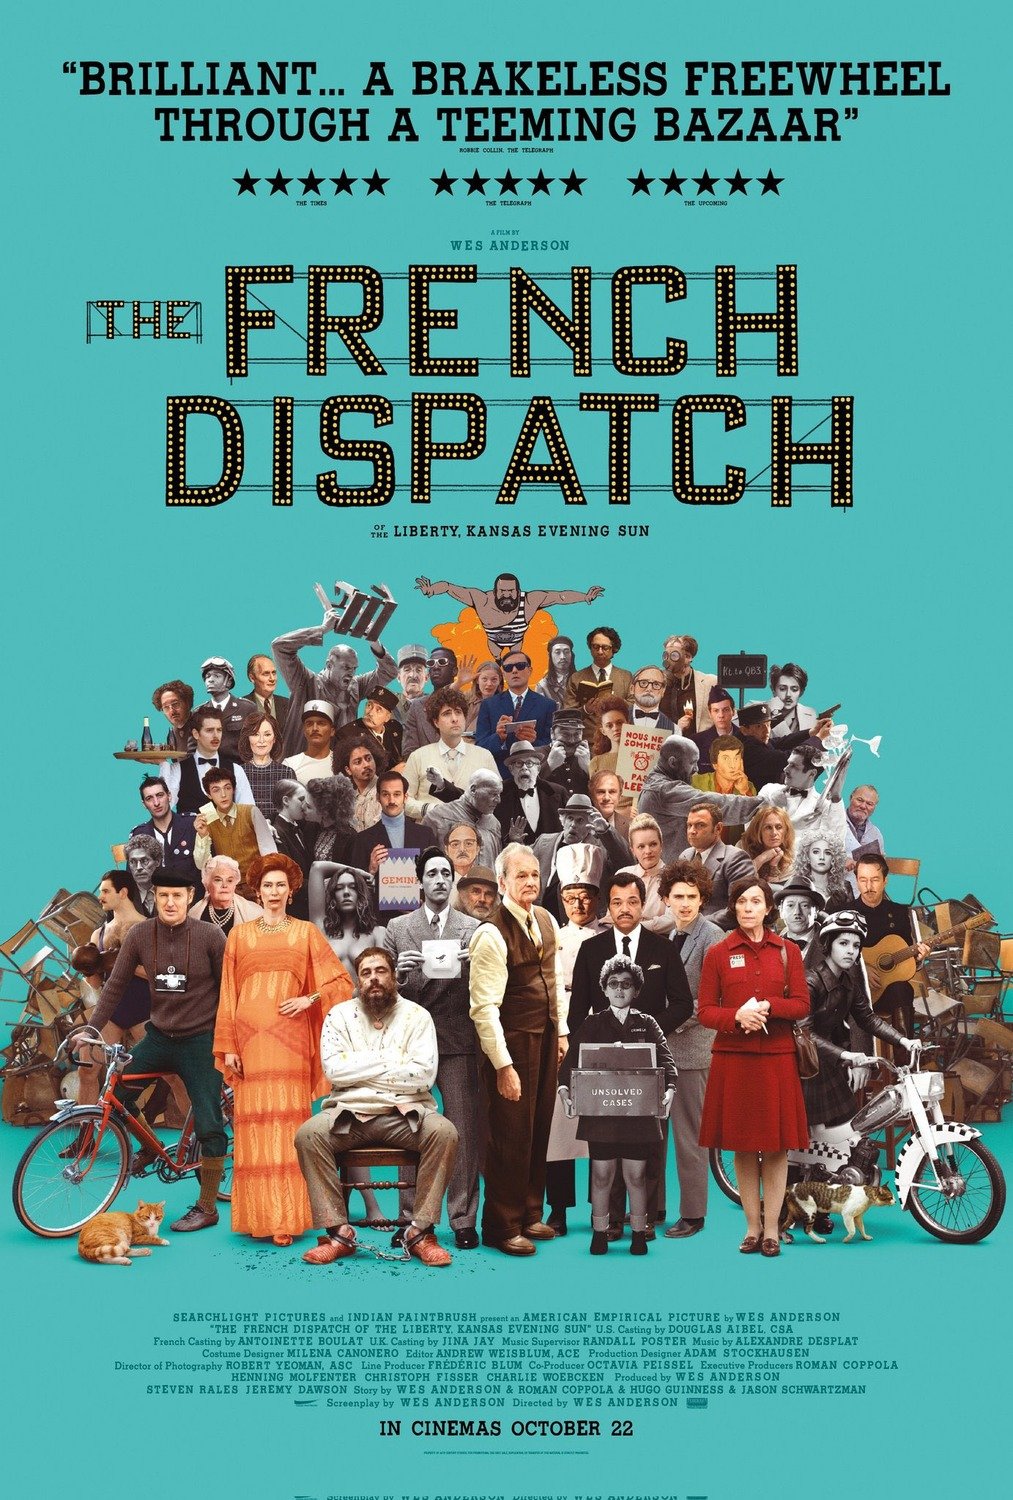 #7. The French Dispatch - I enjoy Wes Anderson films, of course for the amazing casts and the funny stories, but most of all for the quirky way that everything looks on screen. The French Dispatch is no different,  telling the story of the foreign bureau of the Liberty Kansas Evening Sun newspaper and set in Ennui-sur-Blasé.This was the second trip to a Cinema to see something this year, and it didn’t disappoint - laugh out loud funny from the start to the end. Standout performances from Benecio del Toro and Lea Seydoux in the first act.  Brilliant stuff. 